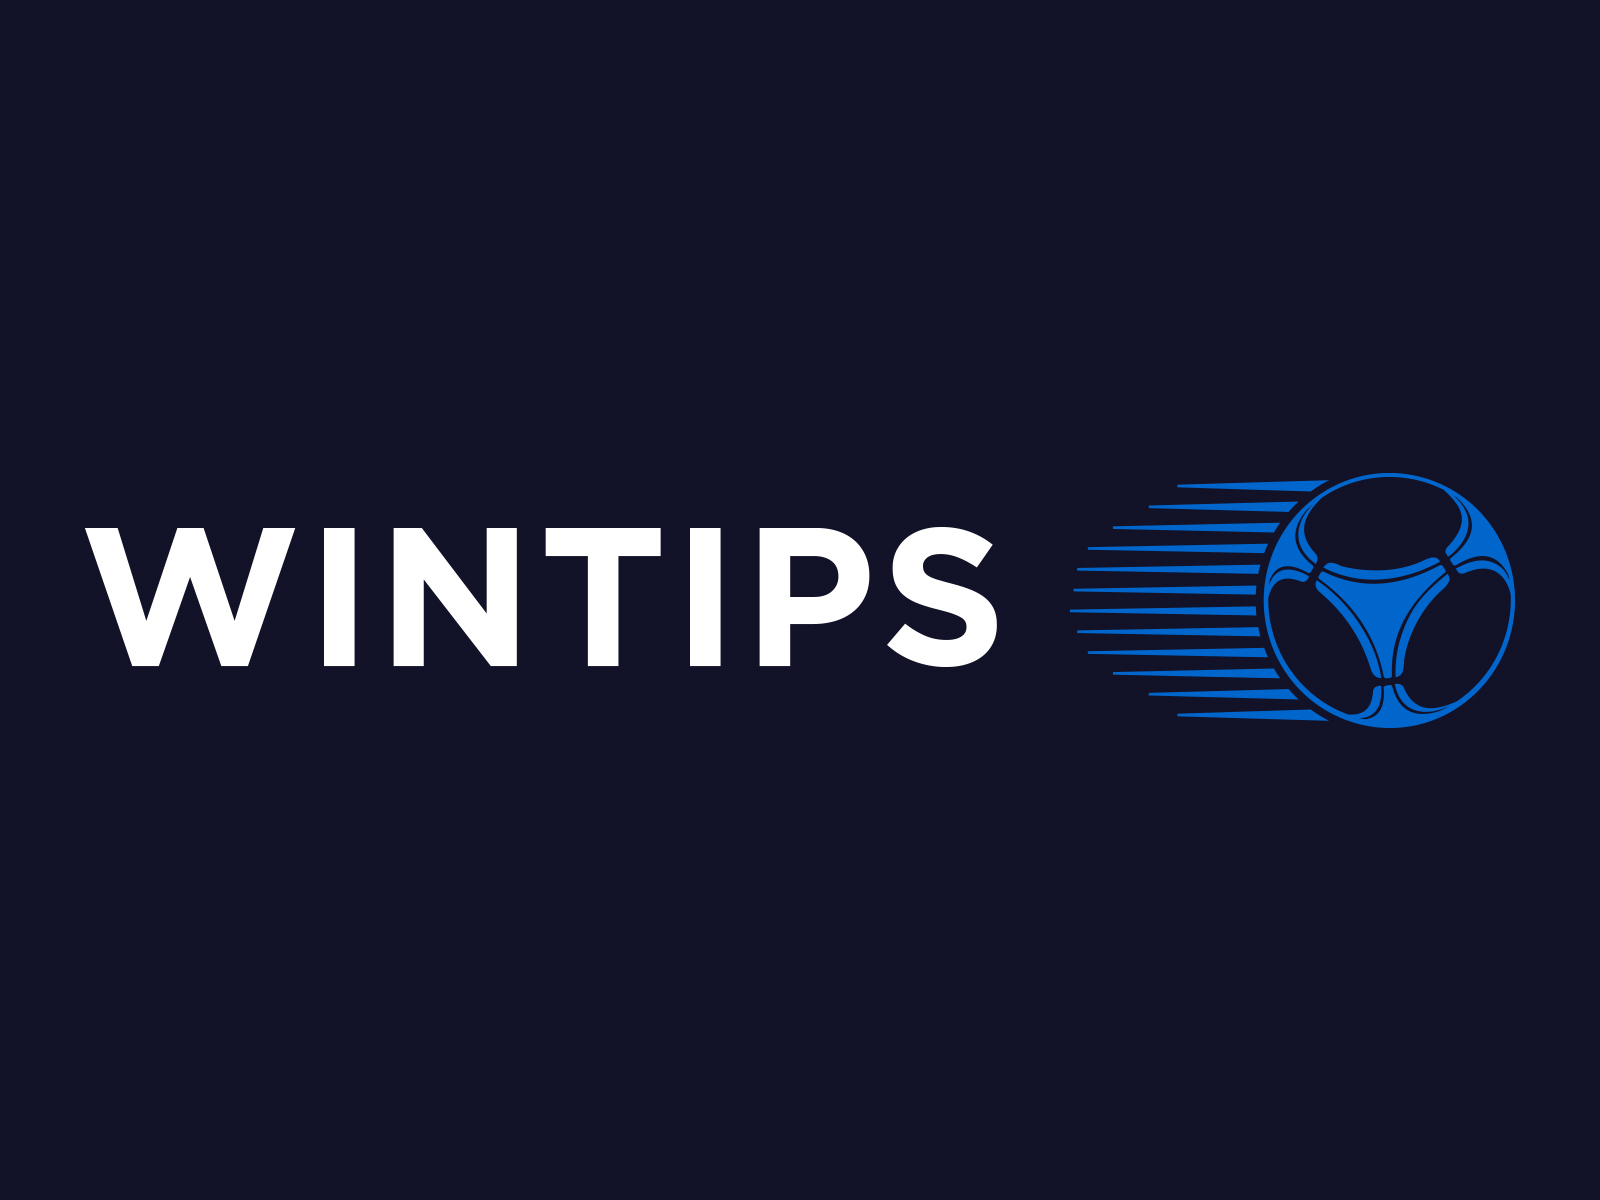 WinTips - Helping You Win When Playing Online Betting.